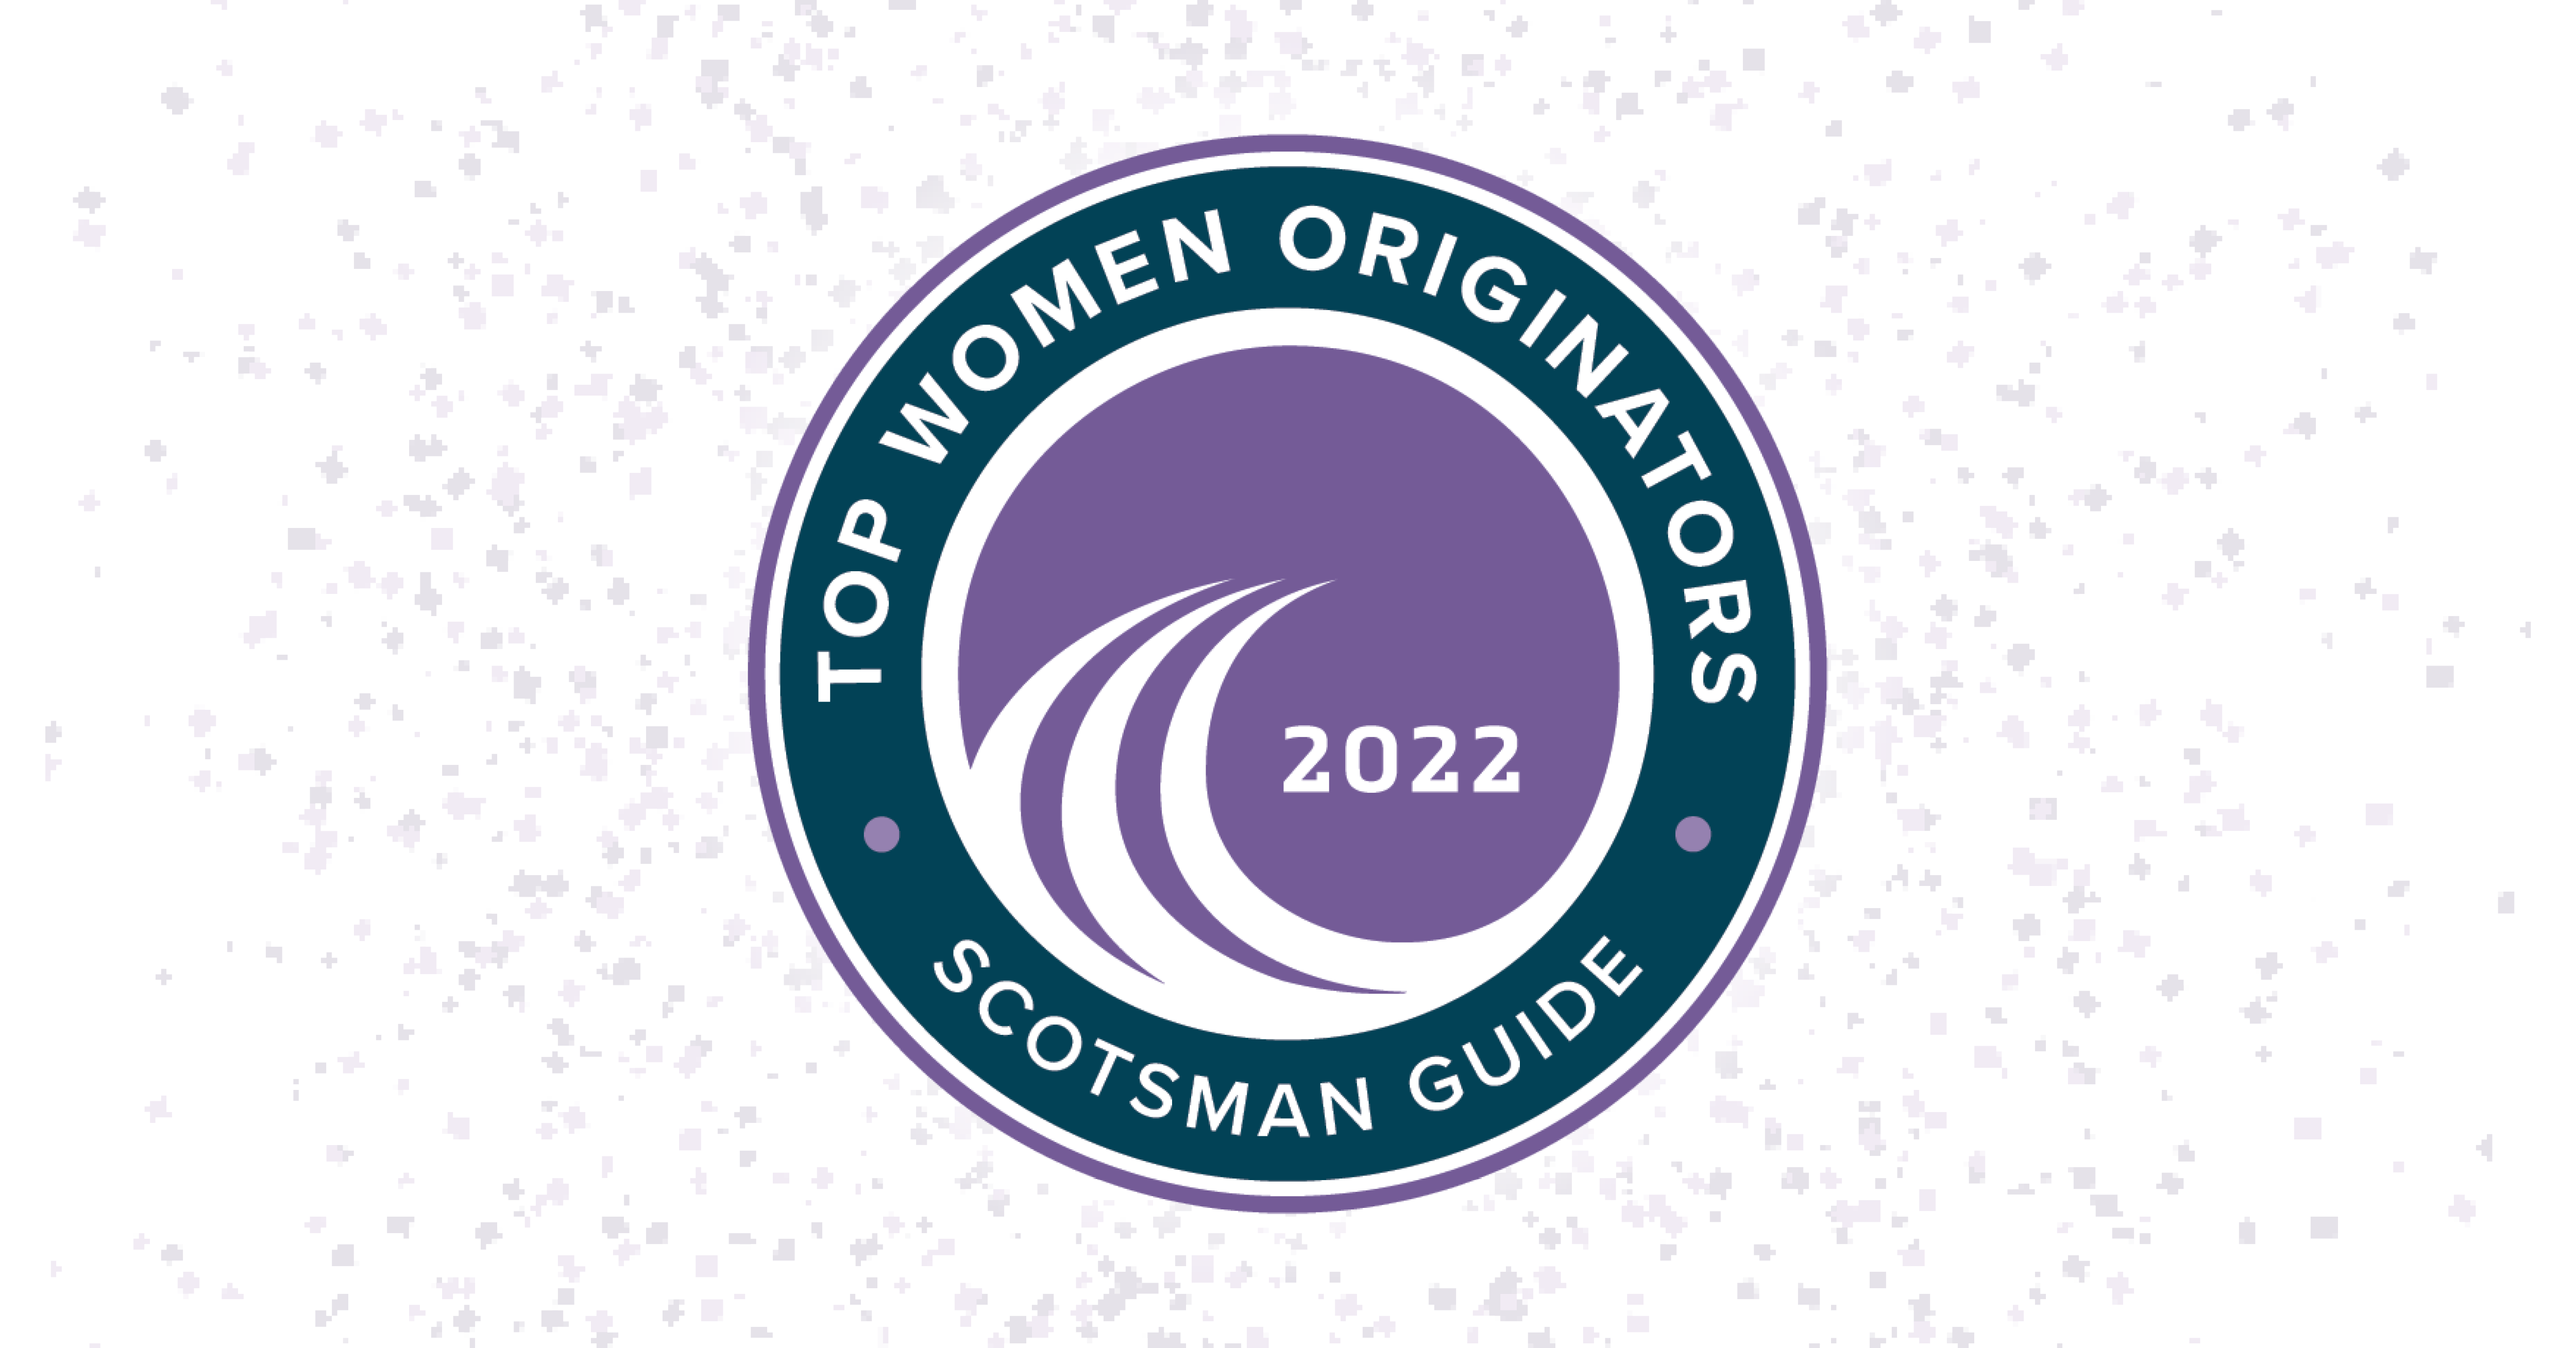 9 HOMEOWNERS MORTGAGE PROFESSIONALS ARE NAMED TOP WOMEN ORIGINATORS FOR 2022 BY SCOTSMAN GUIDE